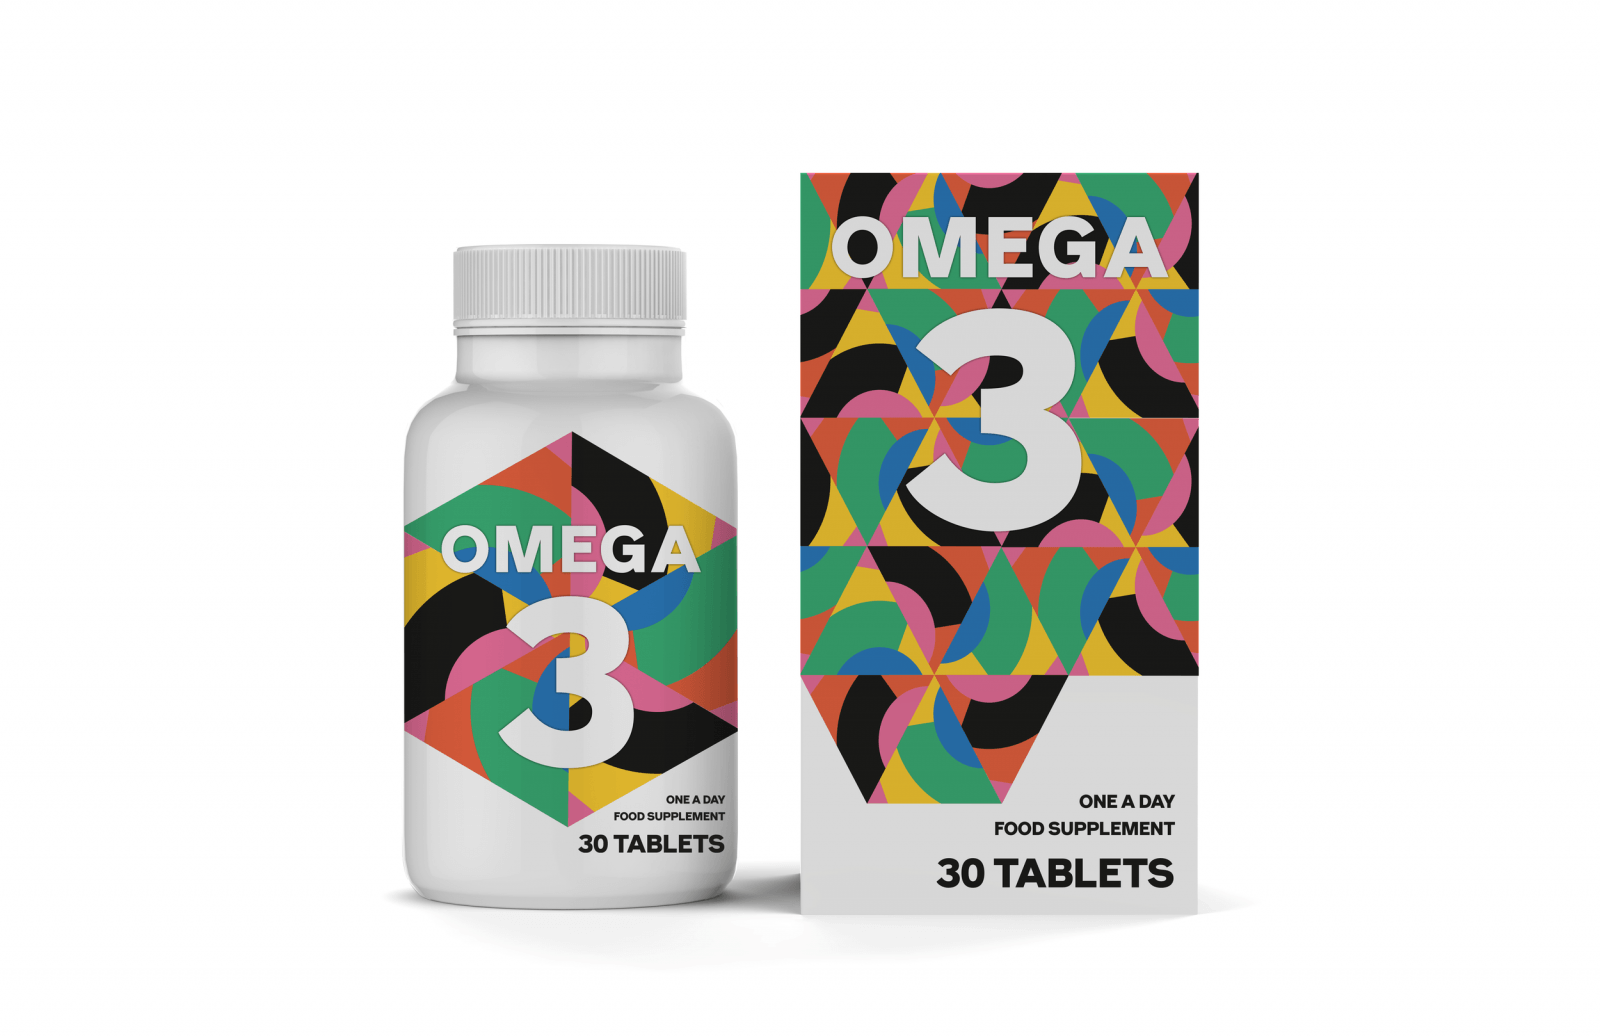 Modern and Colourful Vitamin Supplements Brand and Packaging Design Concept